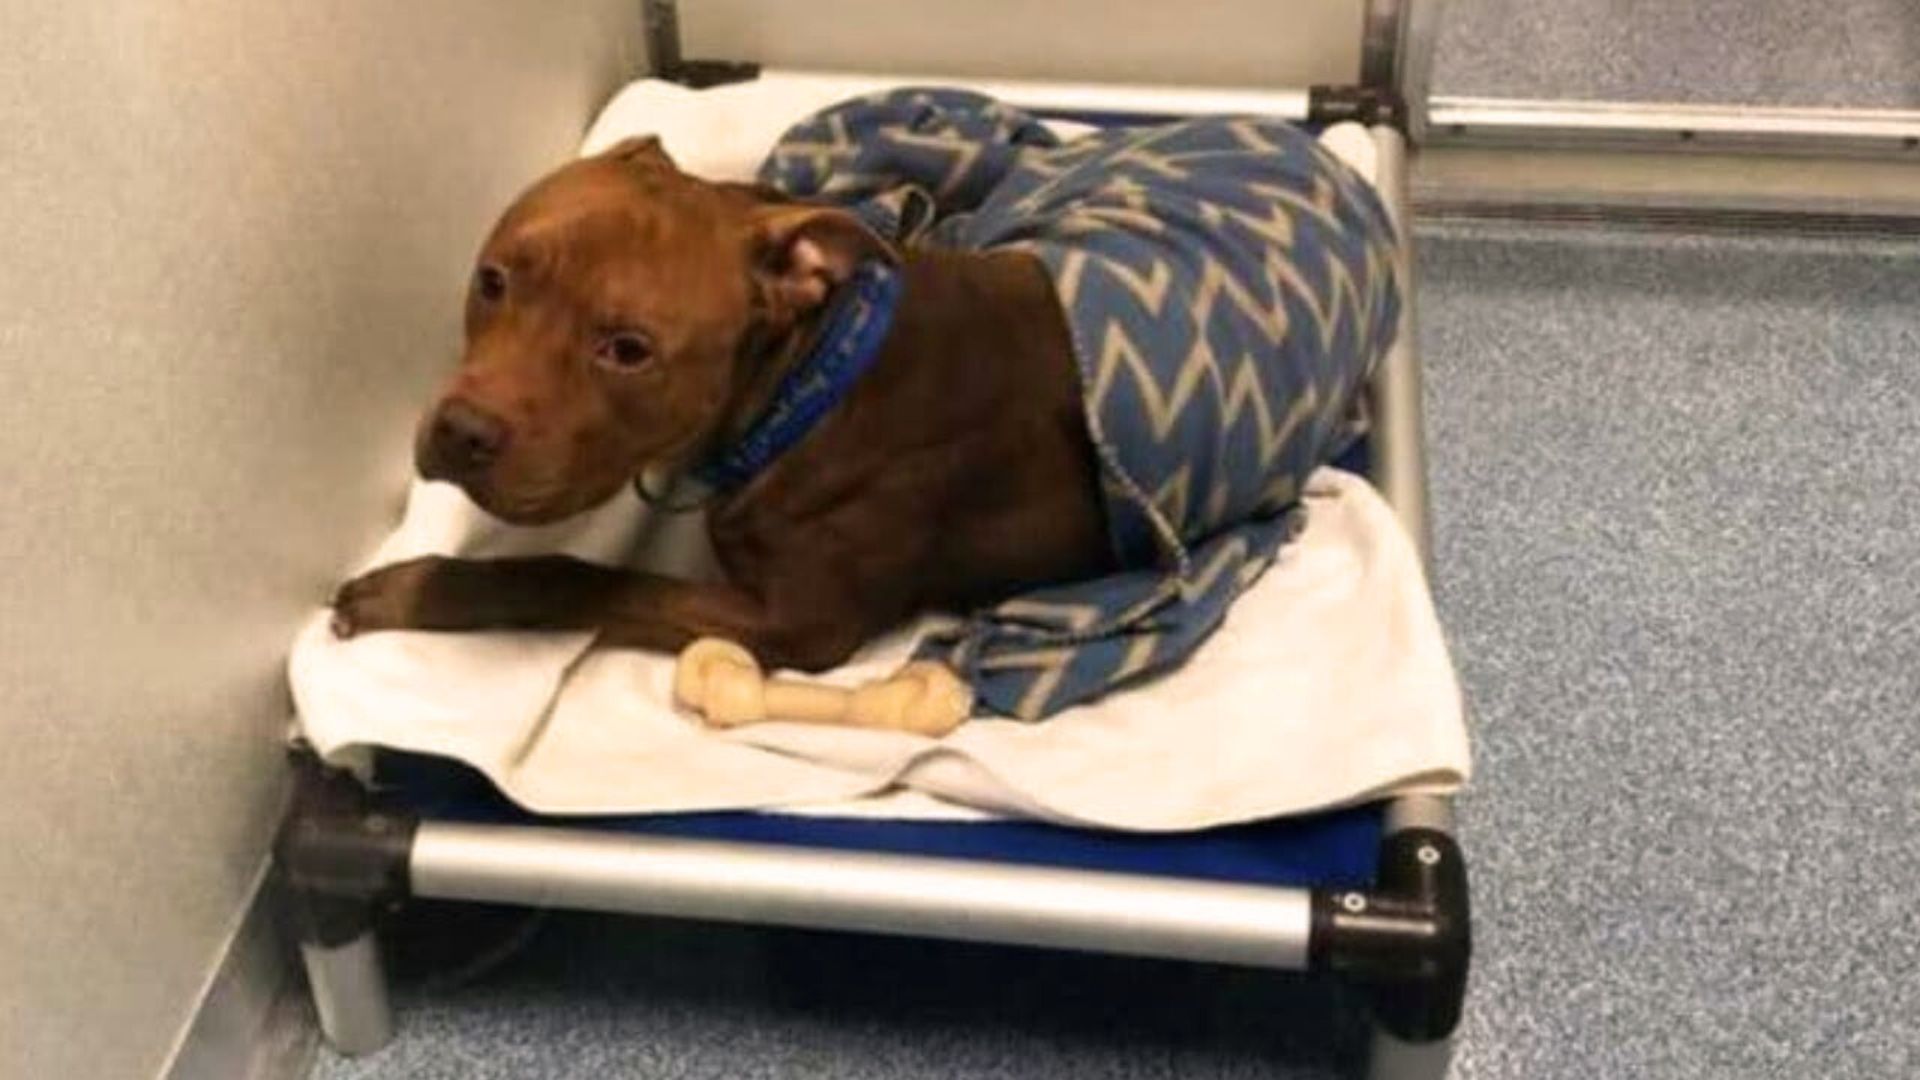 This Shelter Dog Was Too Sad To Sleep, So His Caretaker Surprised Him With An Amazing Gift